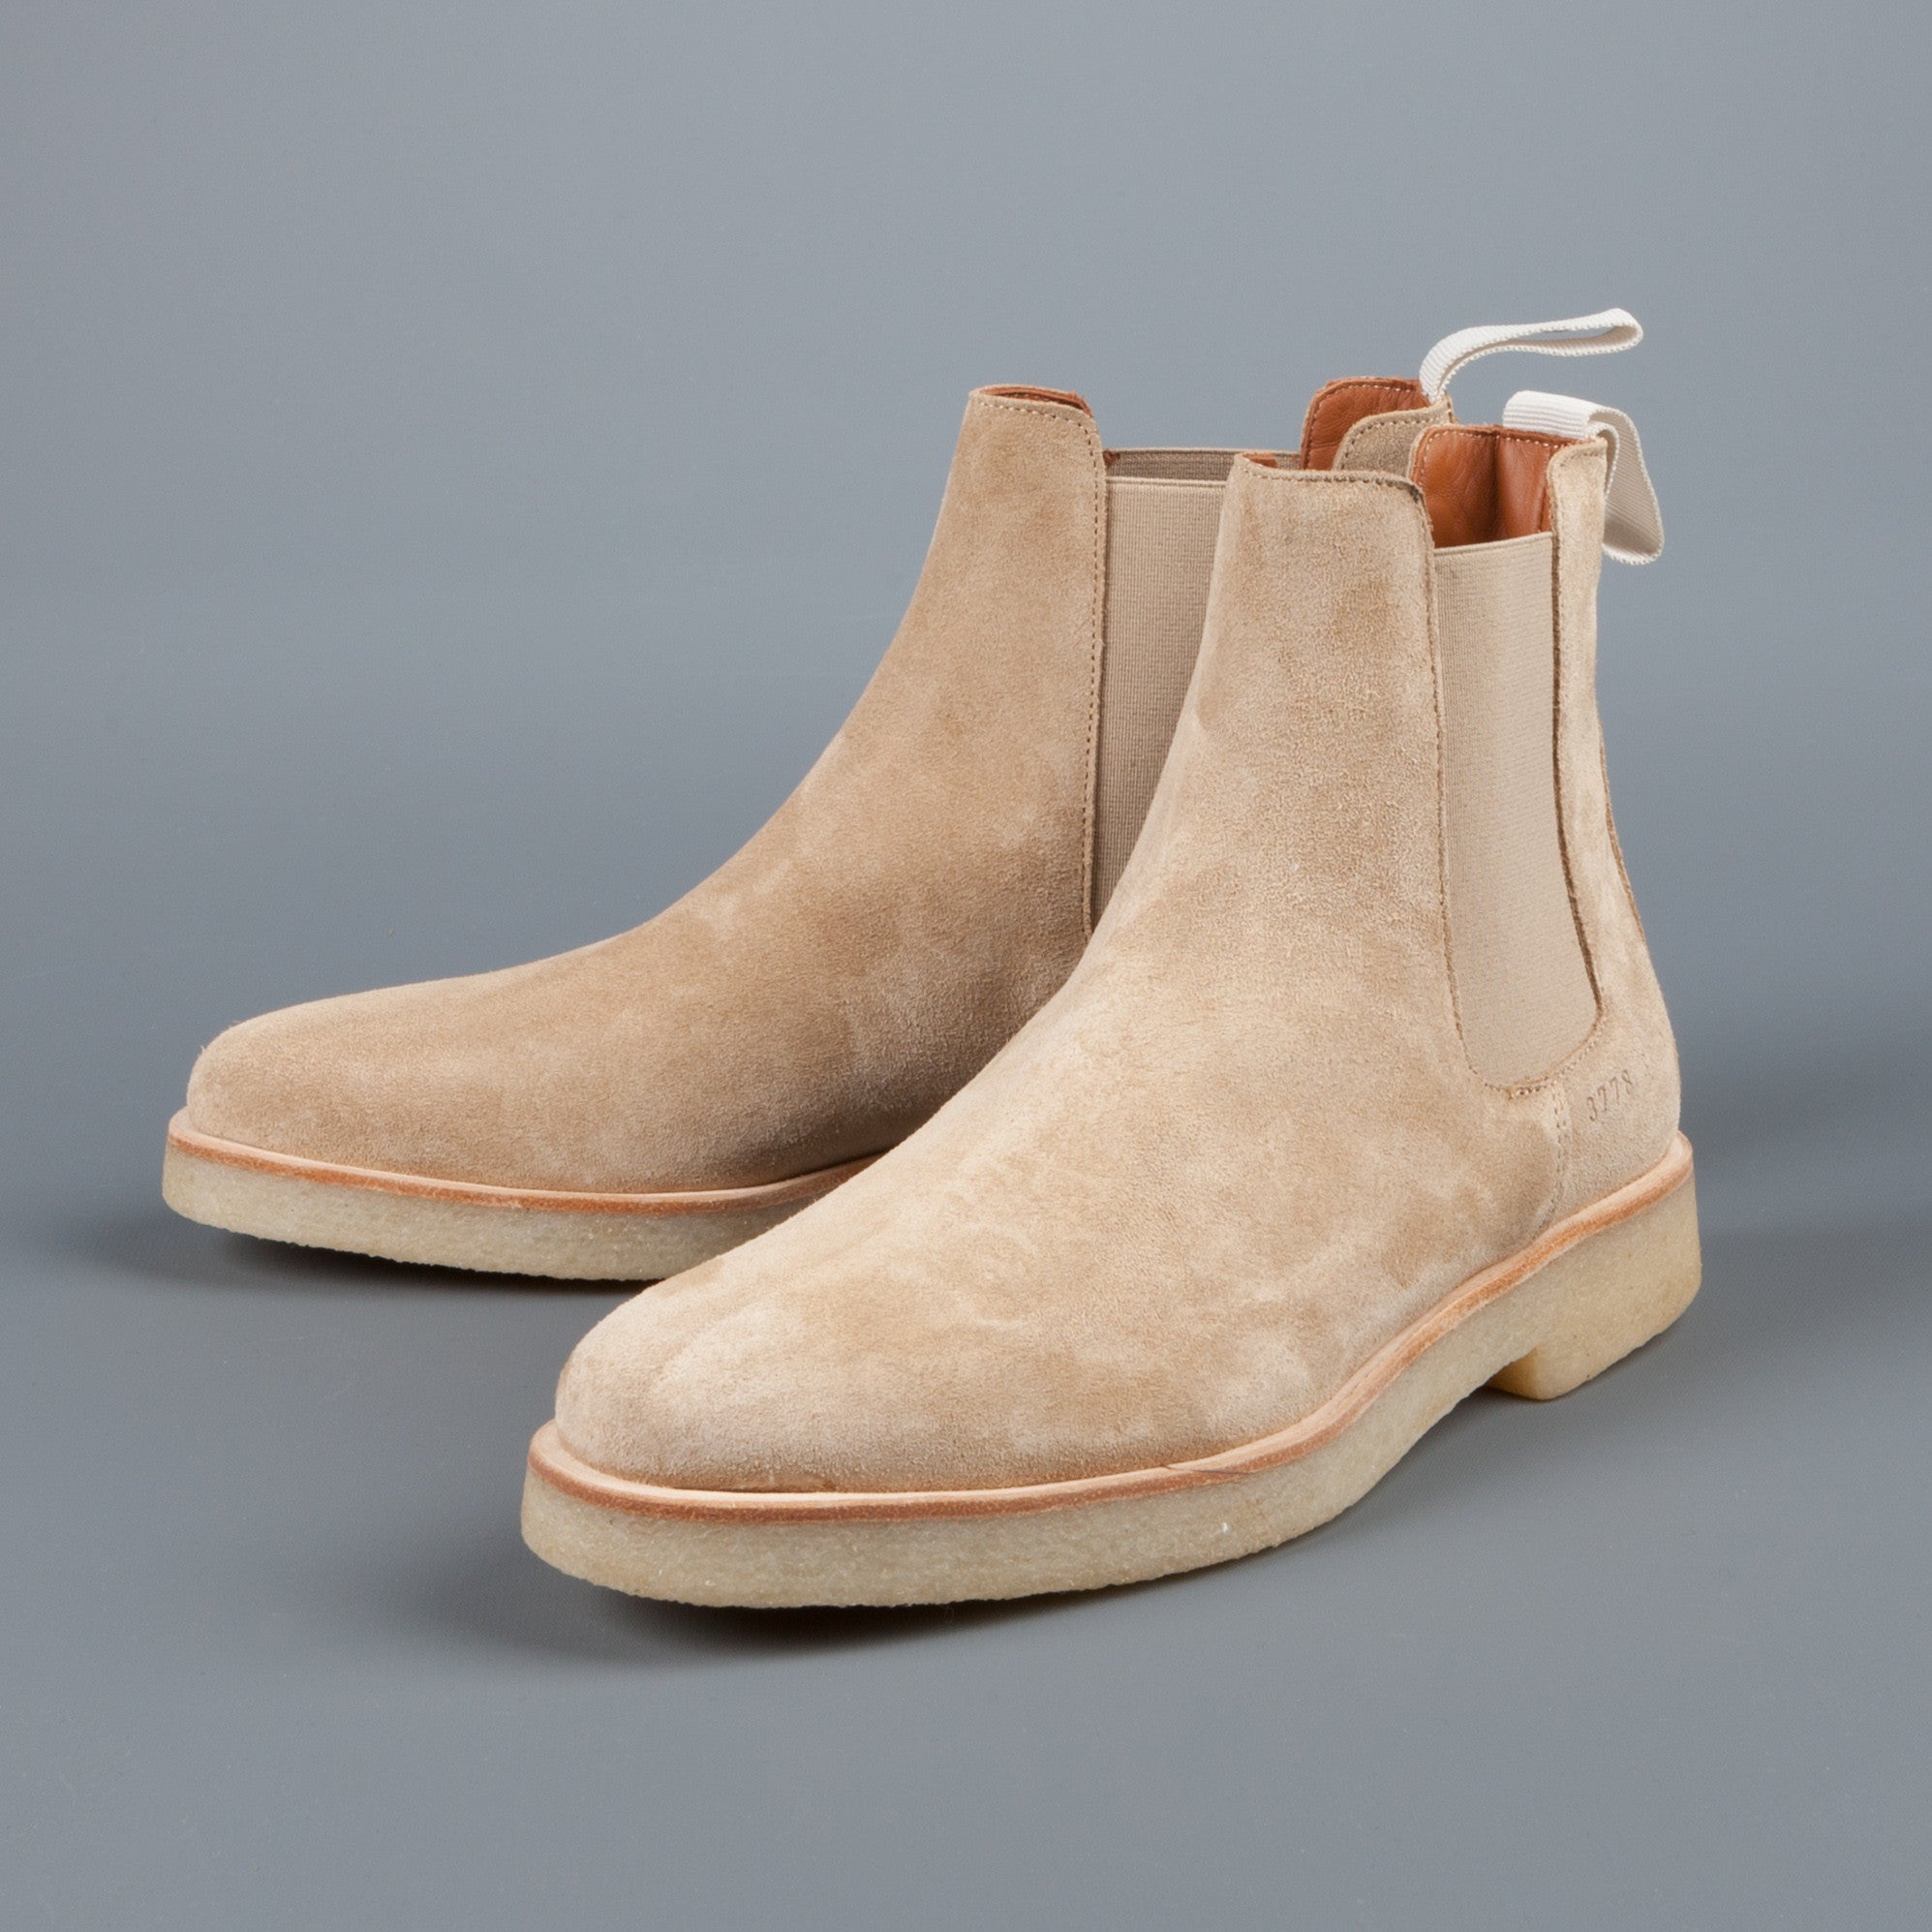 Common Projects Woman by Common Projects Chelsea boot in suede – Frans Boone